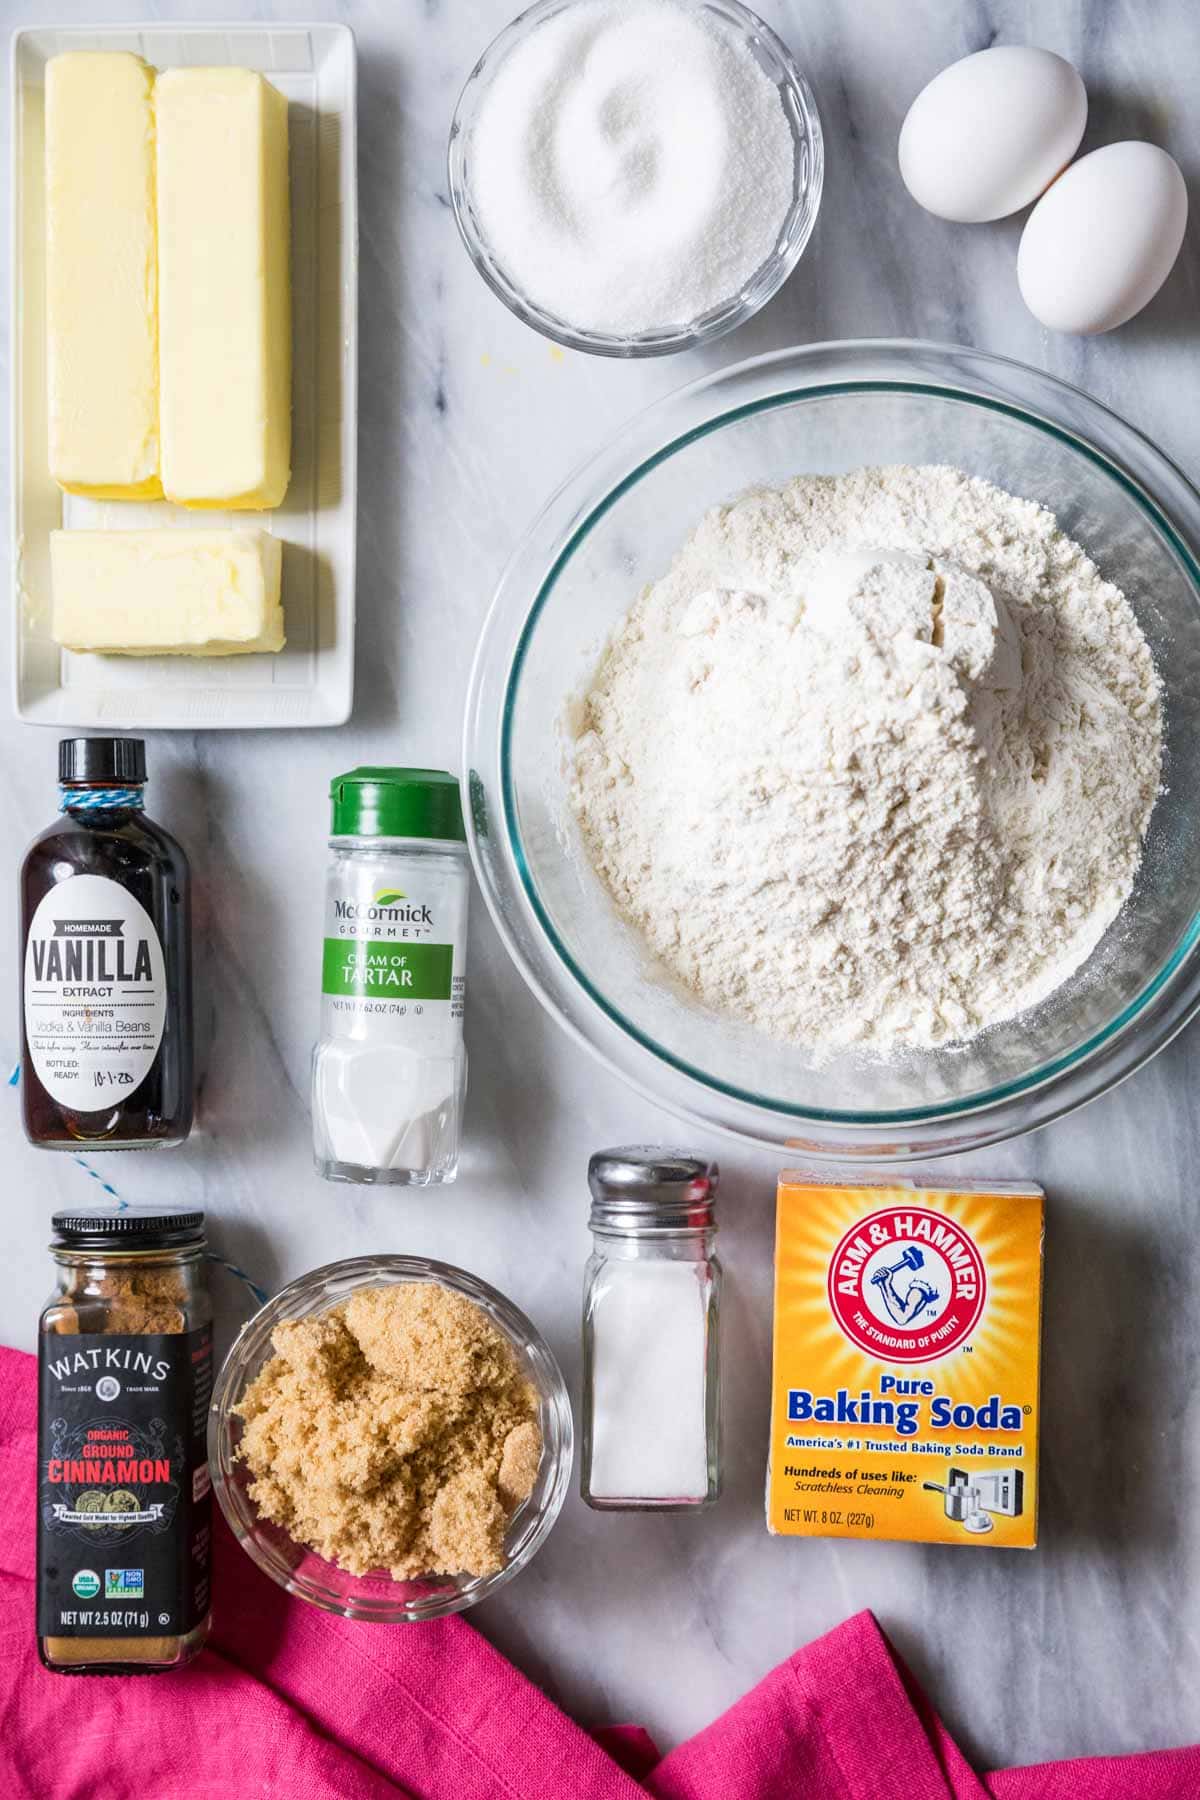 Overhead view of ingredients including butter, brown sugar, cinnamon, and more.